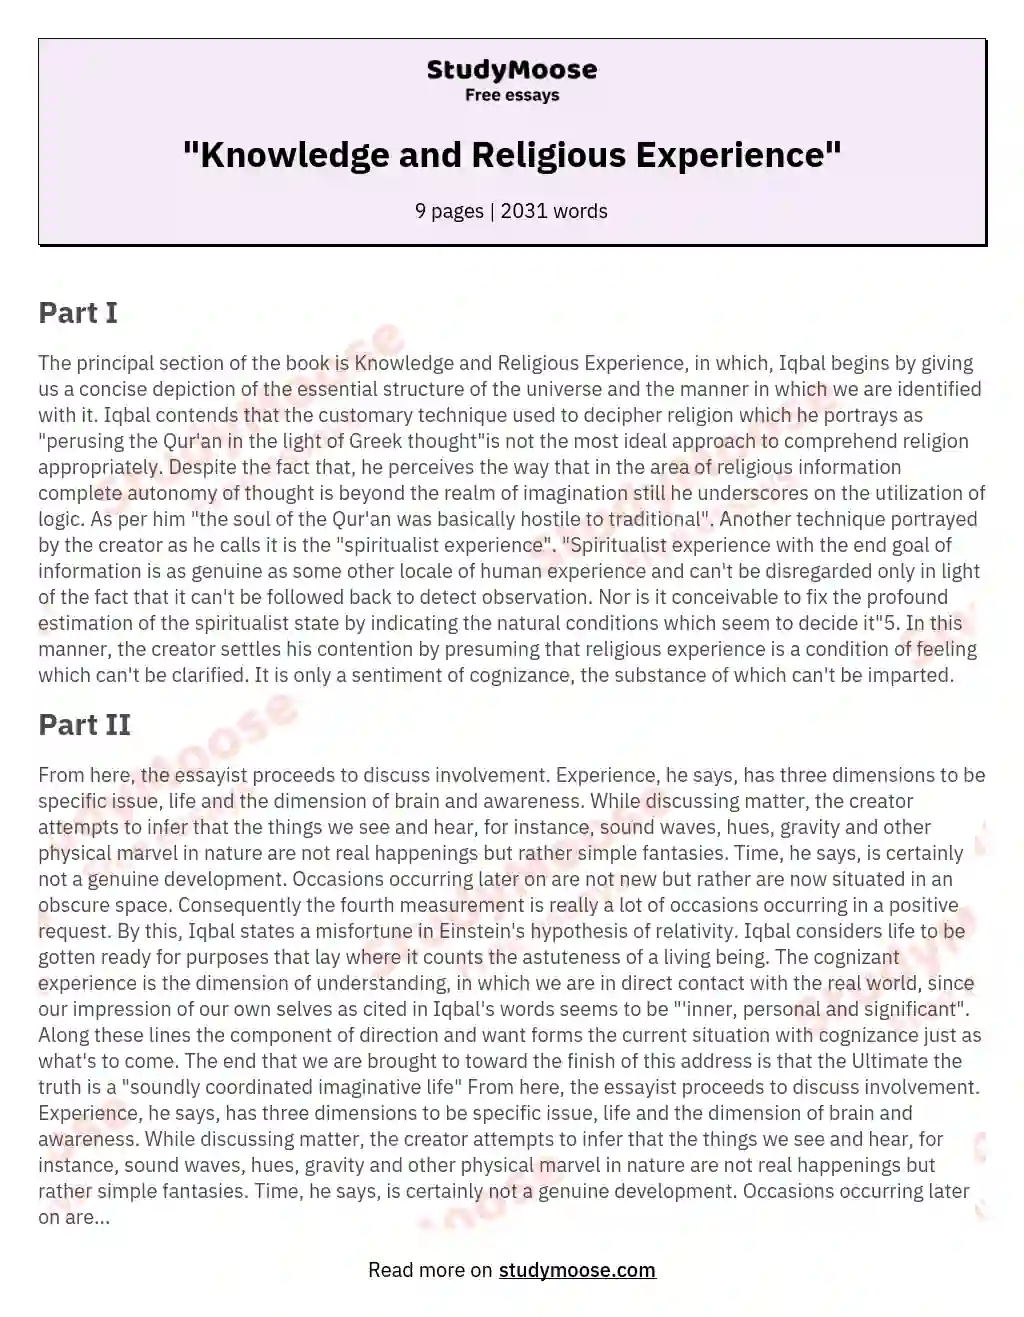 "Knowledge and Religious Experience" essay